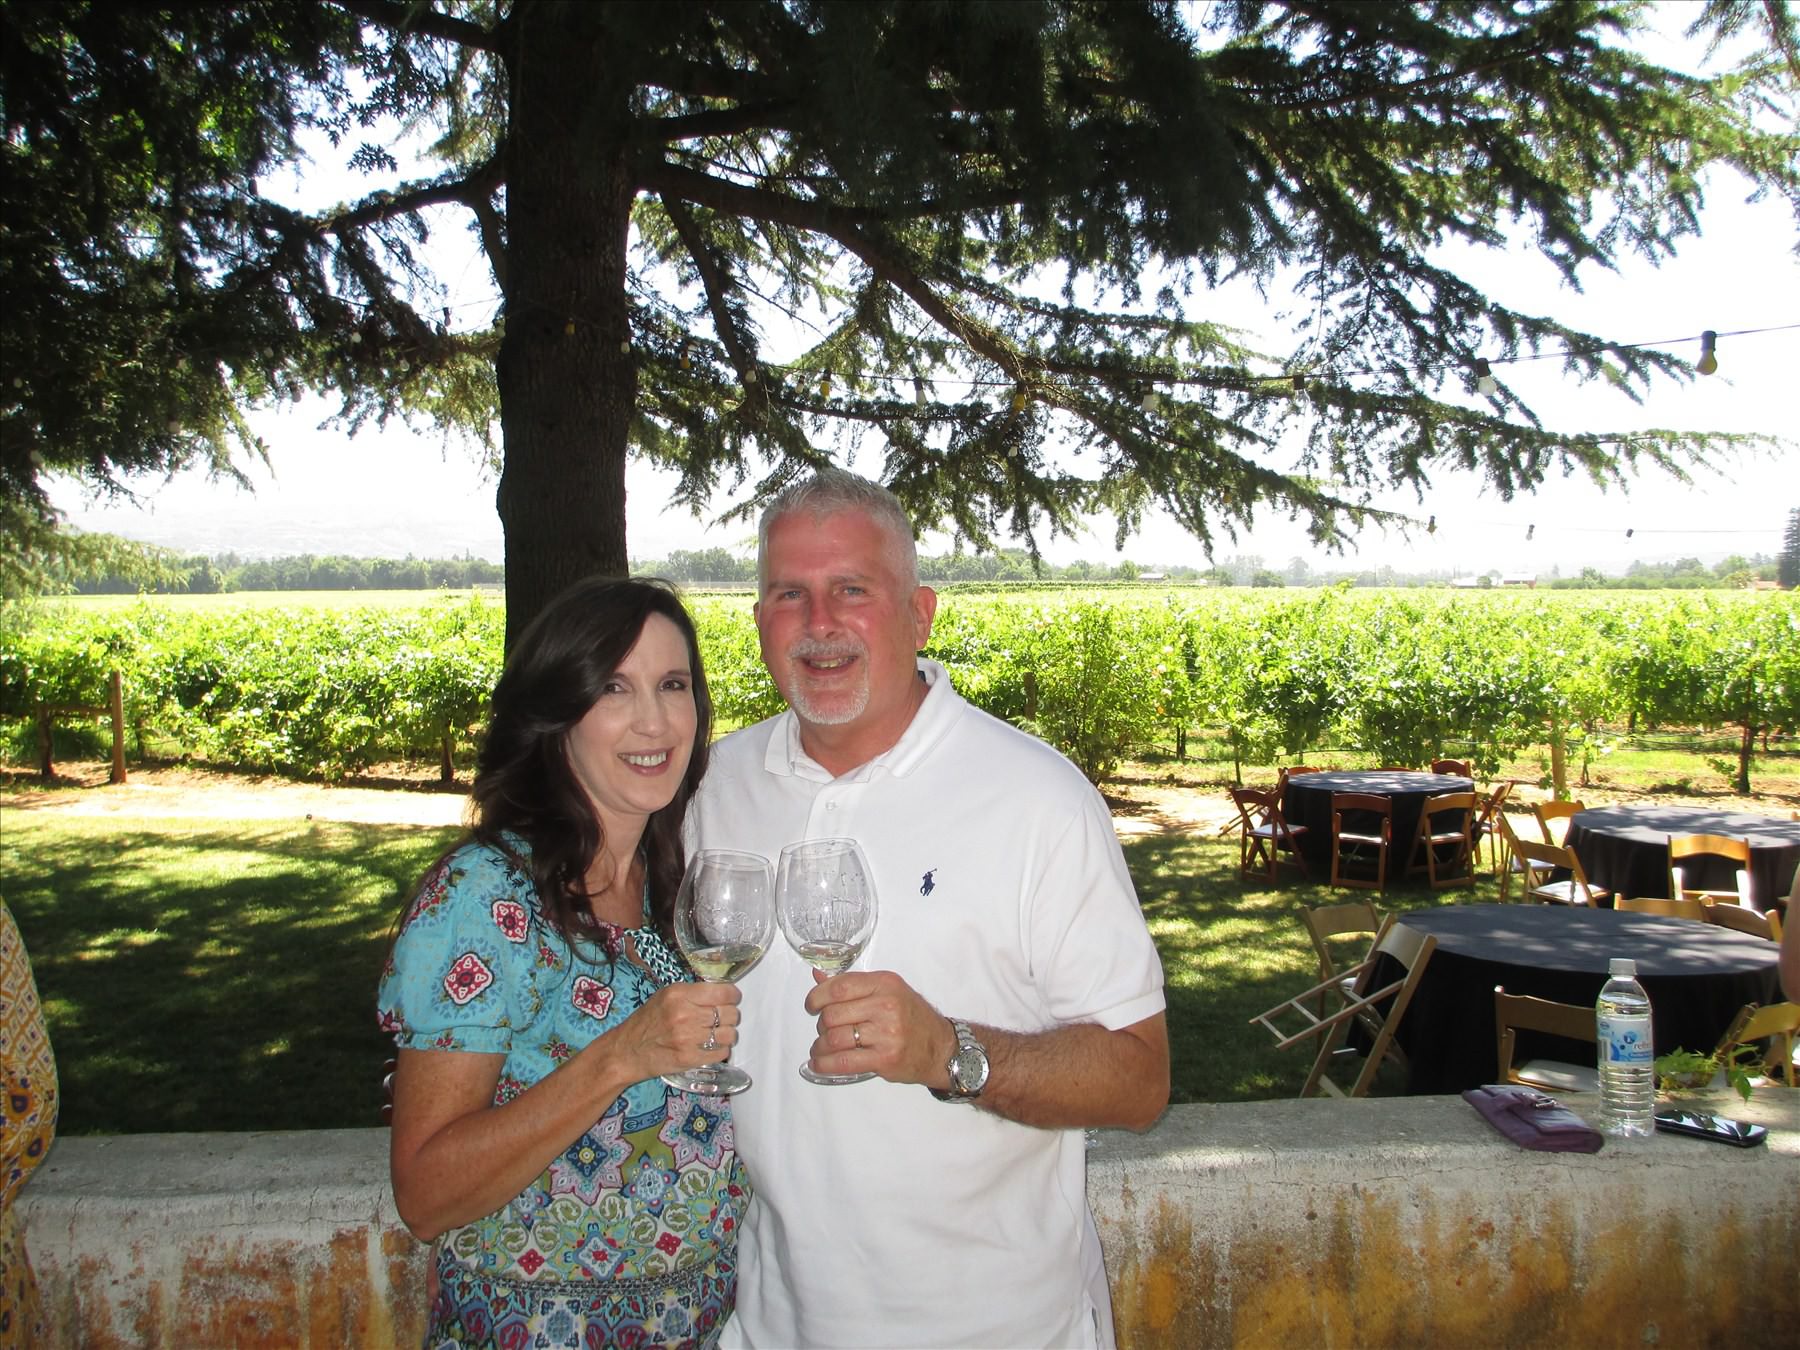 Cheers with wine in Napa Valley San Francisco tour